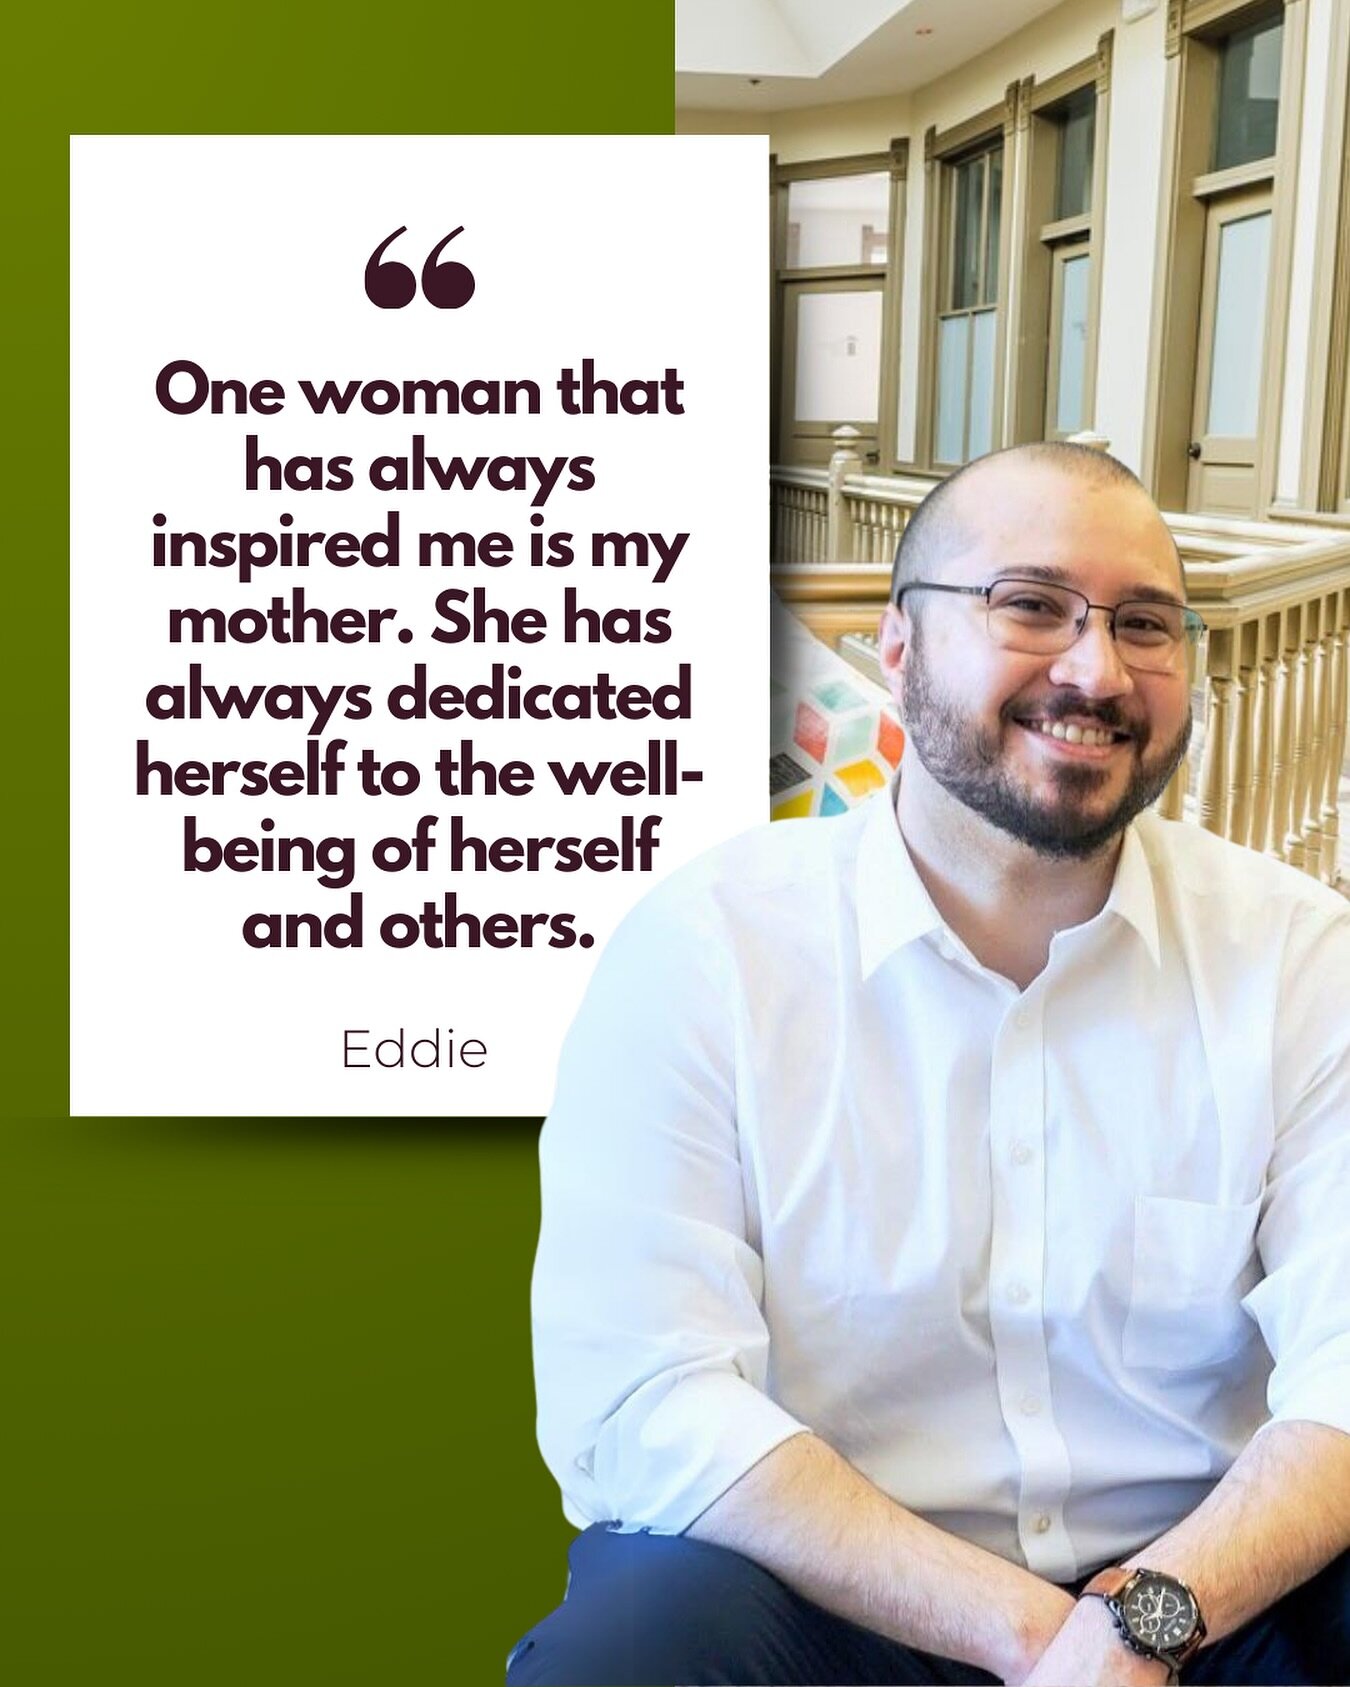 In the spirit of Women&rsquo;s History Month, we&rsquo;re spotlighting the profound ways women shape our lives. This week&rsquo;s response comes from Eddie, one of our team members at Paula Lain Counseling!

&ldquo;One woman that has always inspired 